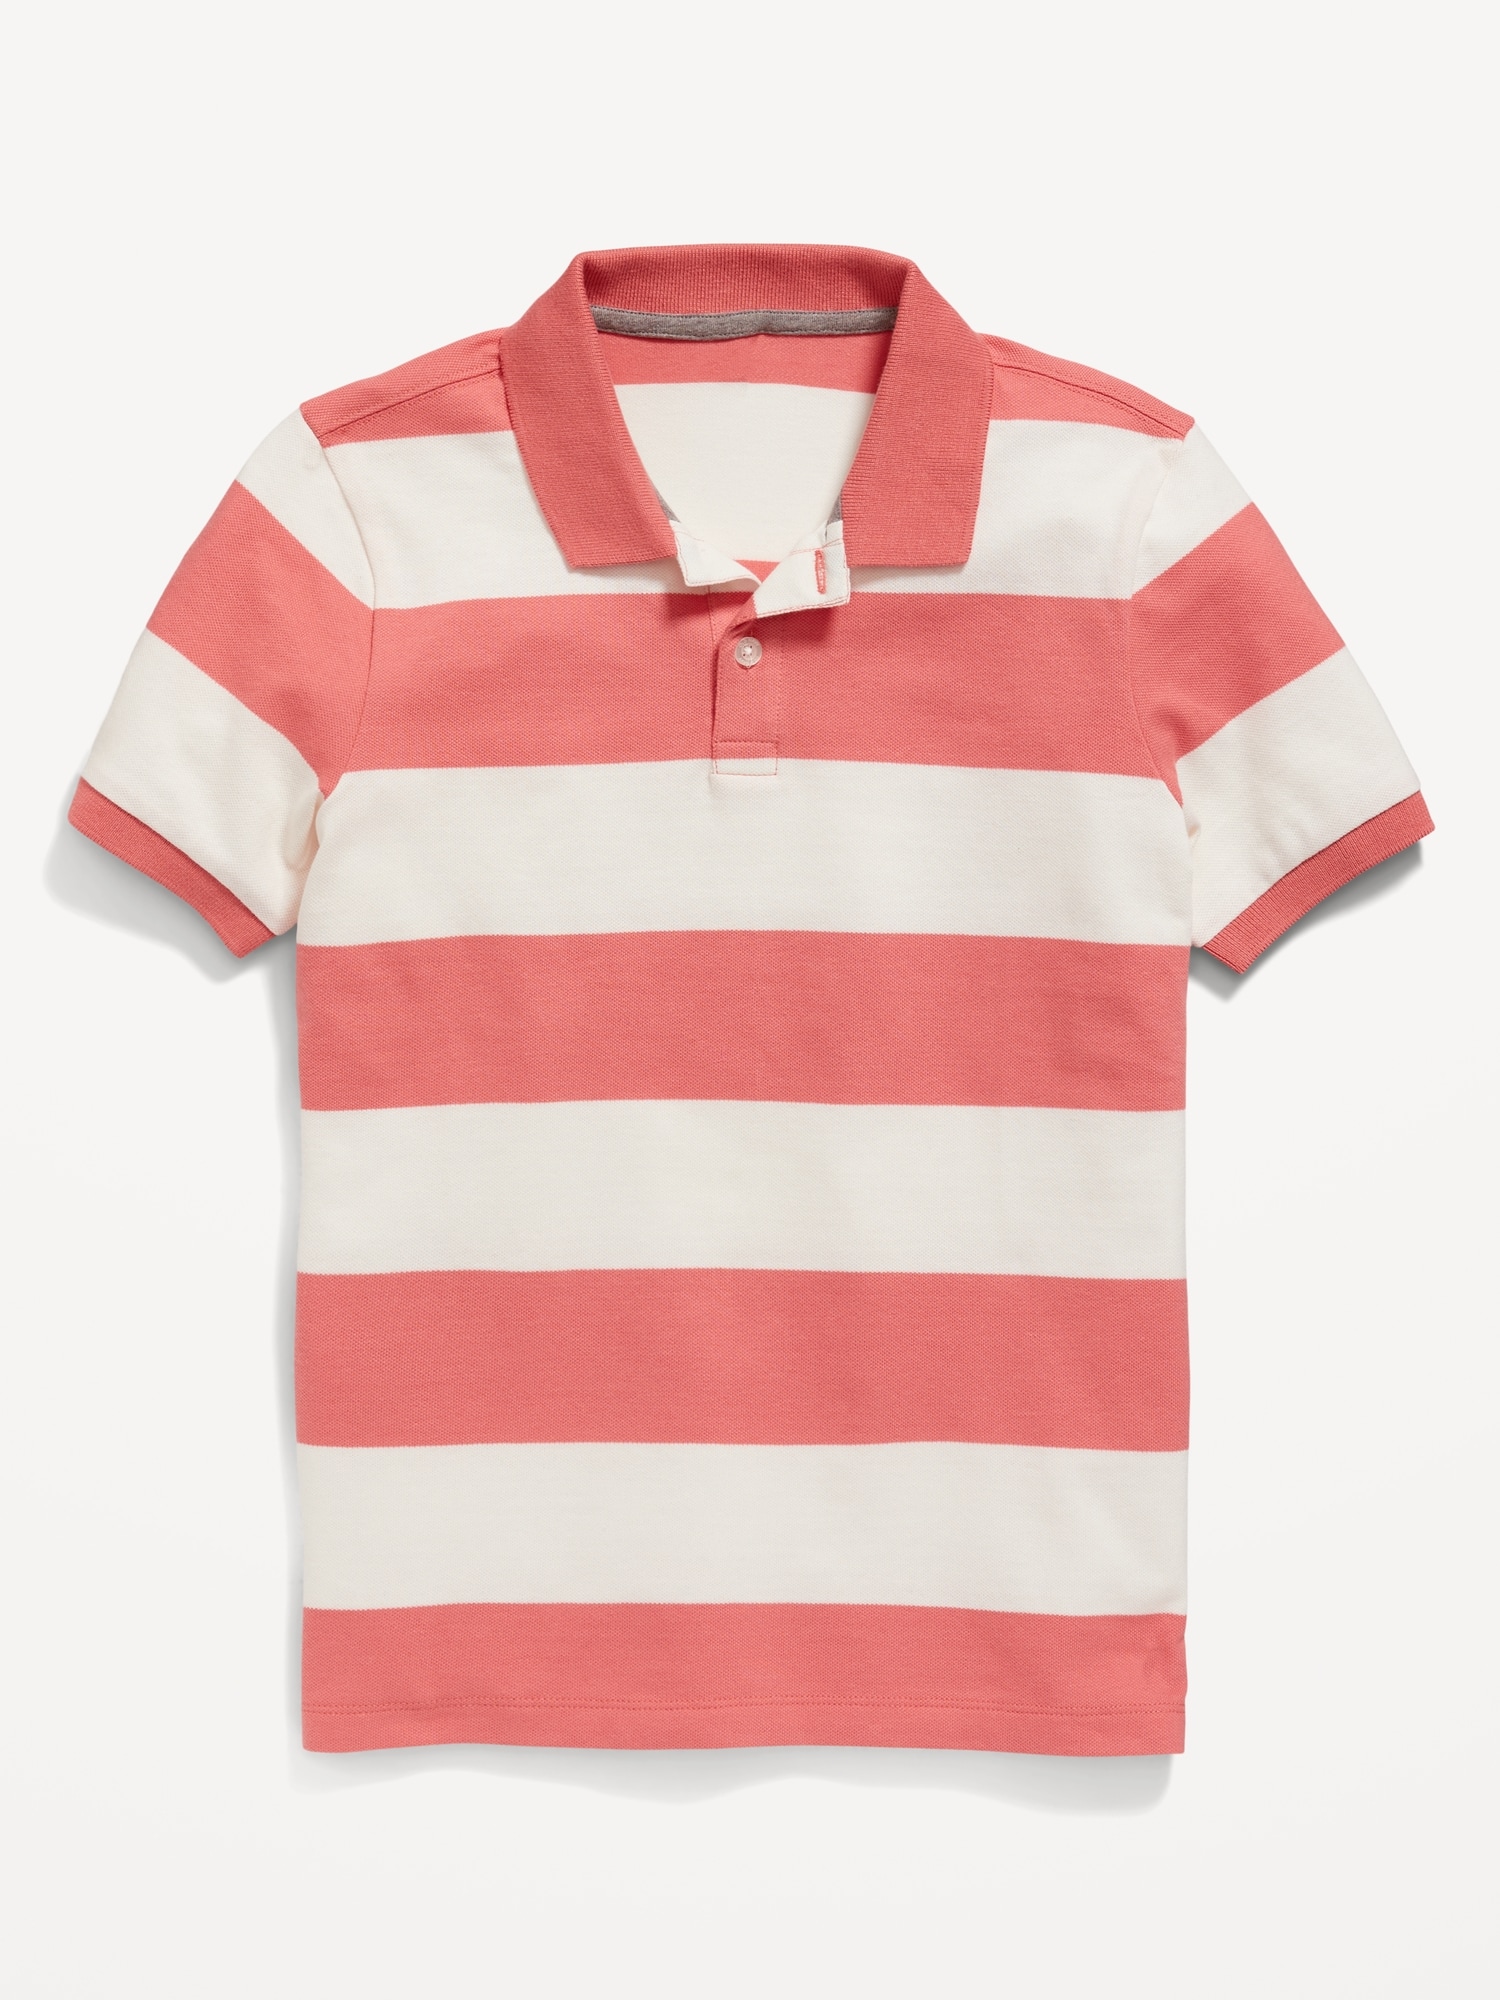 Old Navy Striped Short-Sleeve Rugby Polo Shirt for Boys pink. 1